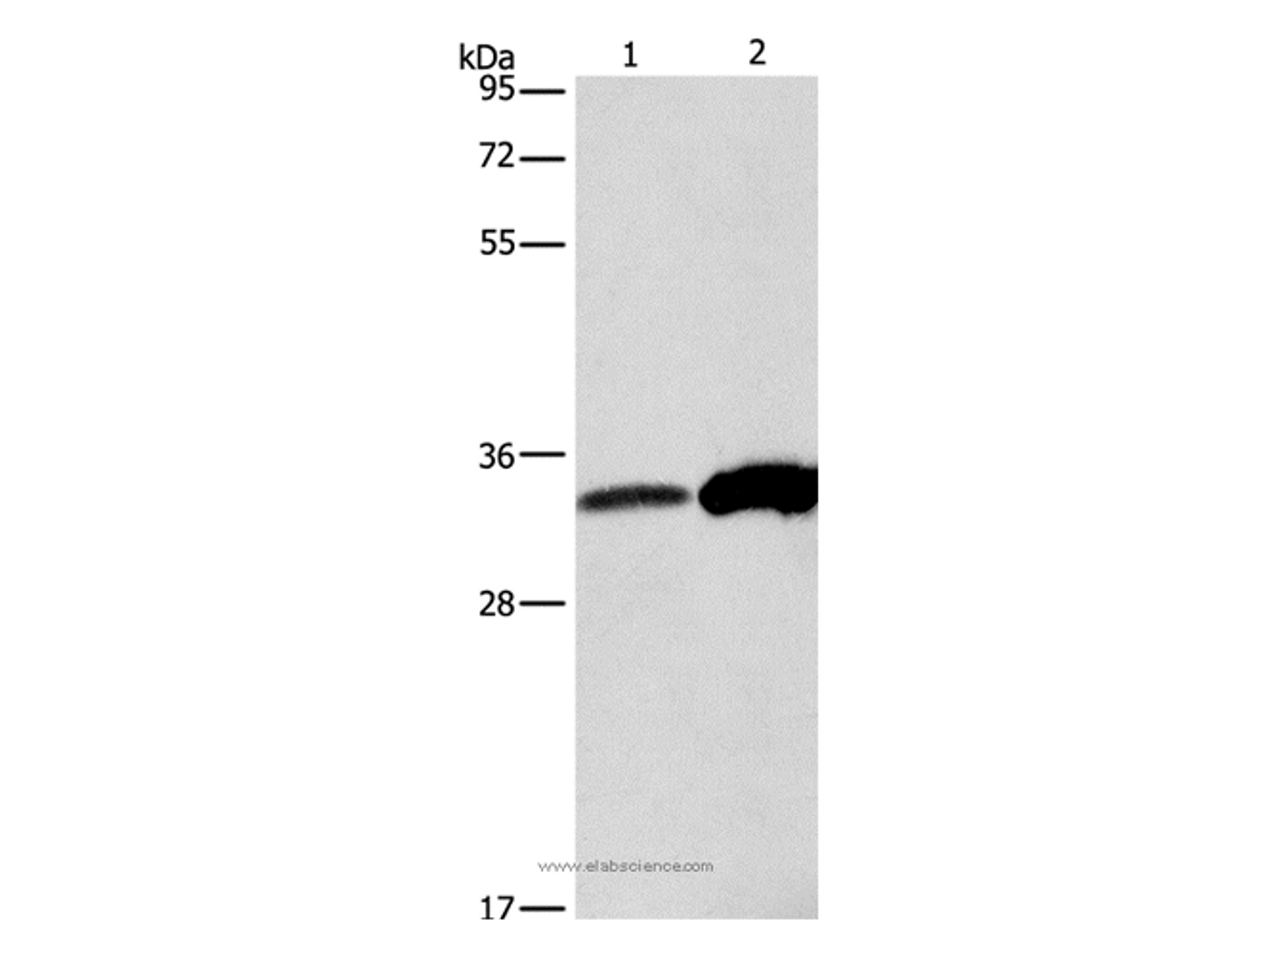 Western Blot analysis of Raw264.7 cell and Human fetal liver tissue using ANXA4 Polyclonal Antibody at dilution of 1:500